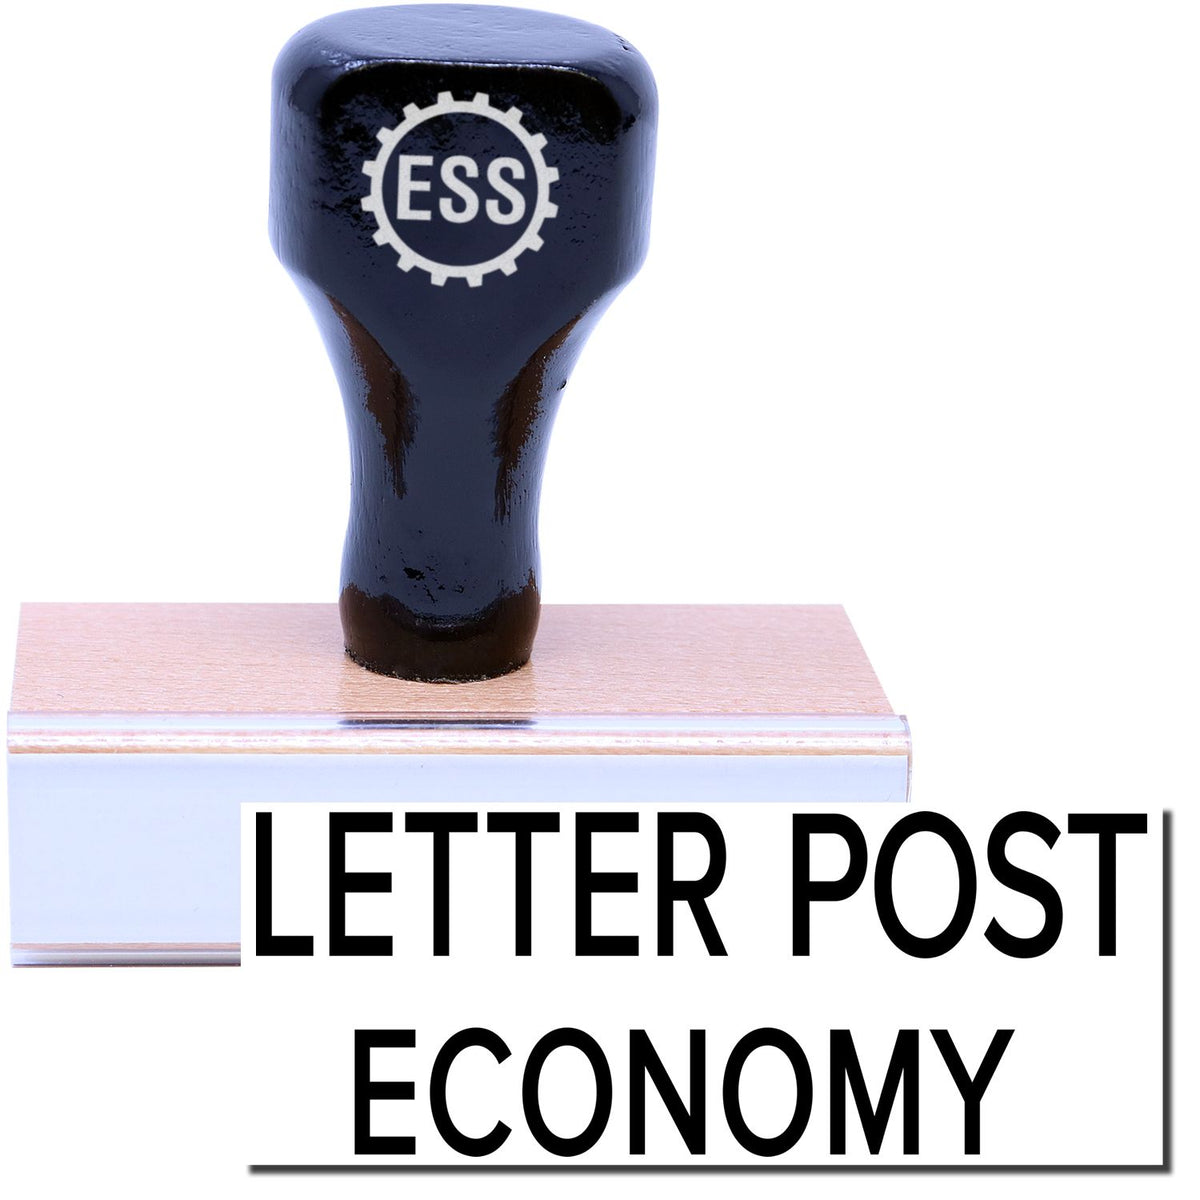 A stock office rubber stamp with a stamped image showing how the text &quot;LETTER POST ECONOMY&quot; is displayed after stamping.